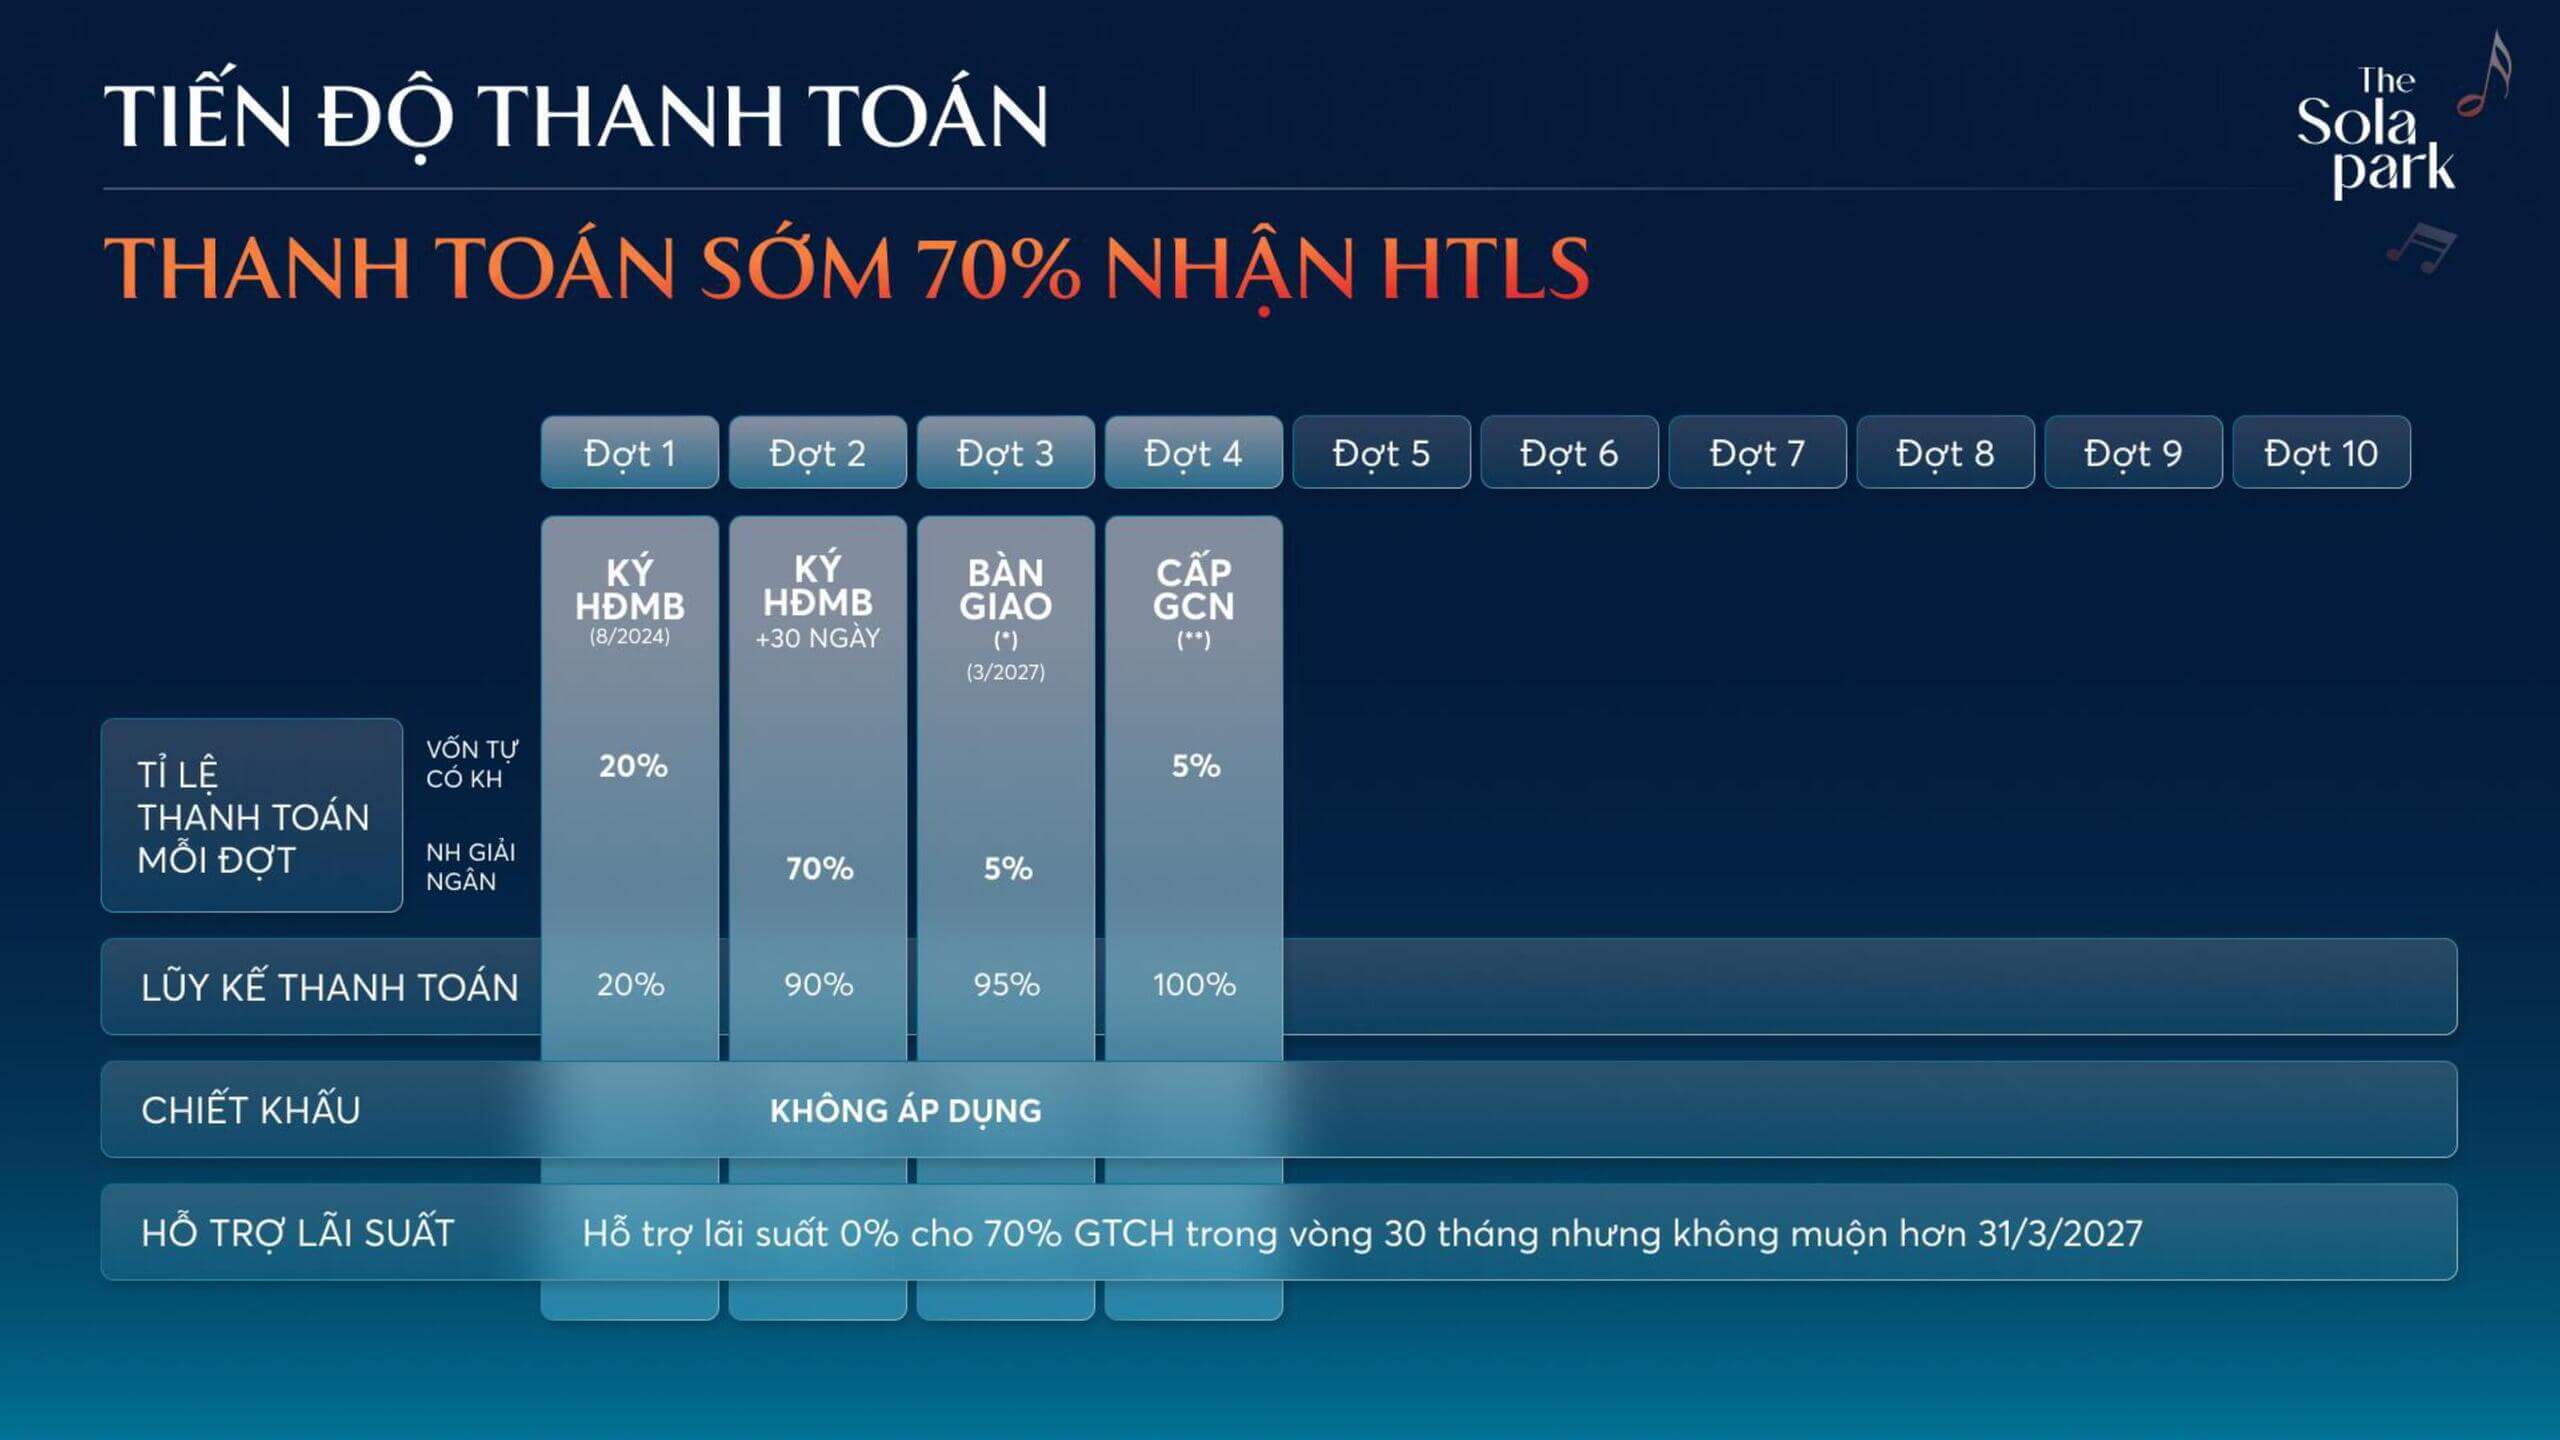 thanh-toan-som-70